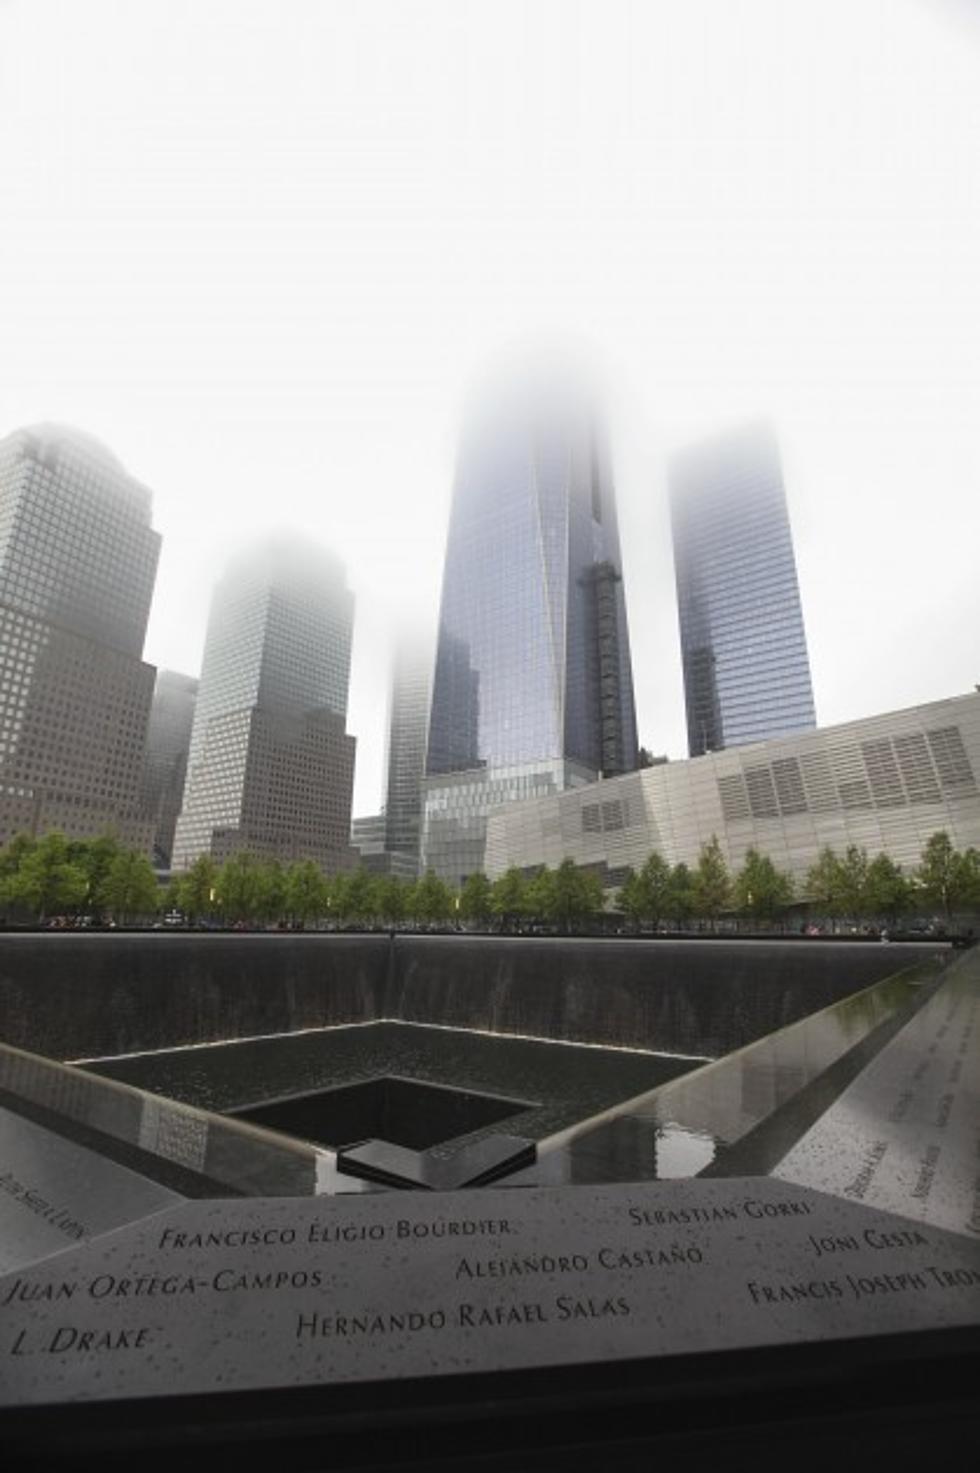 Thoughts About 9/11 On The 13th Anniversary